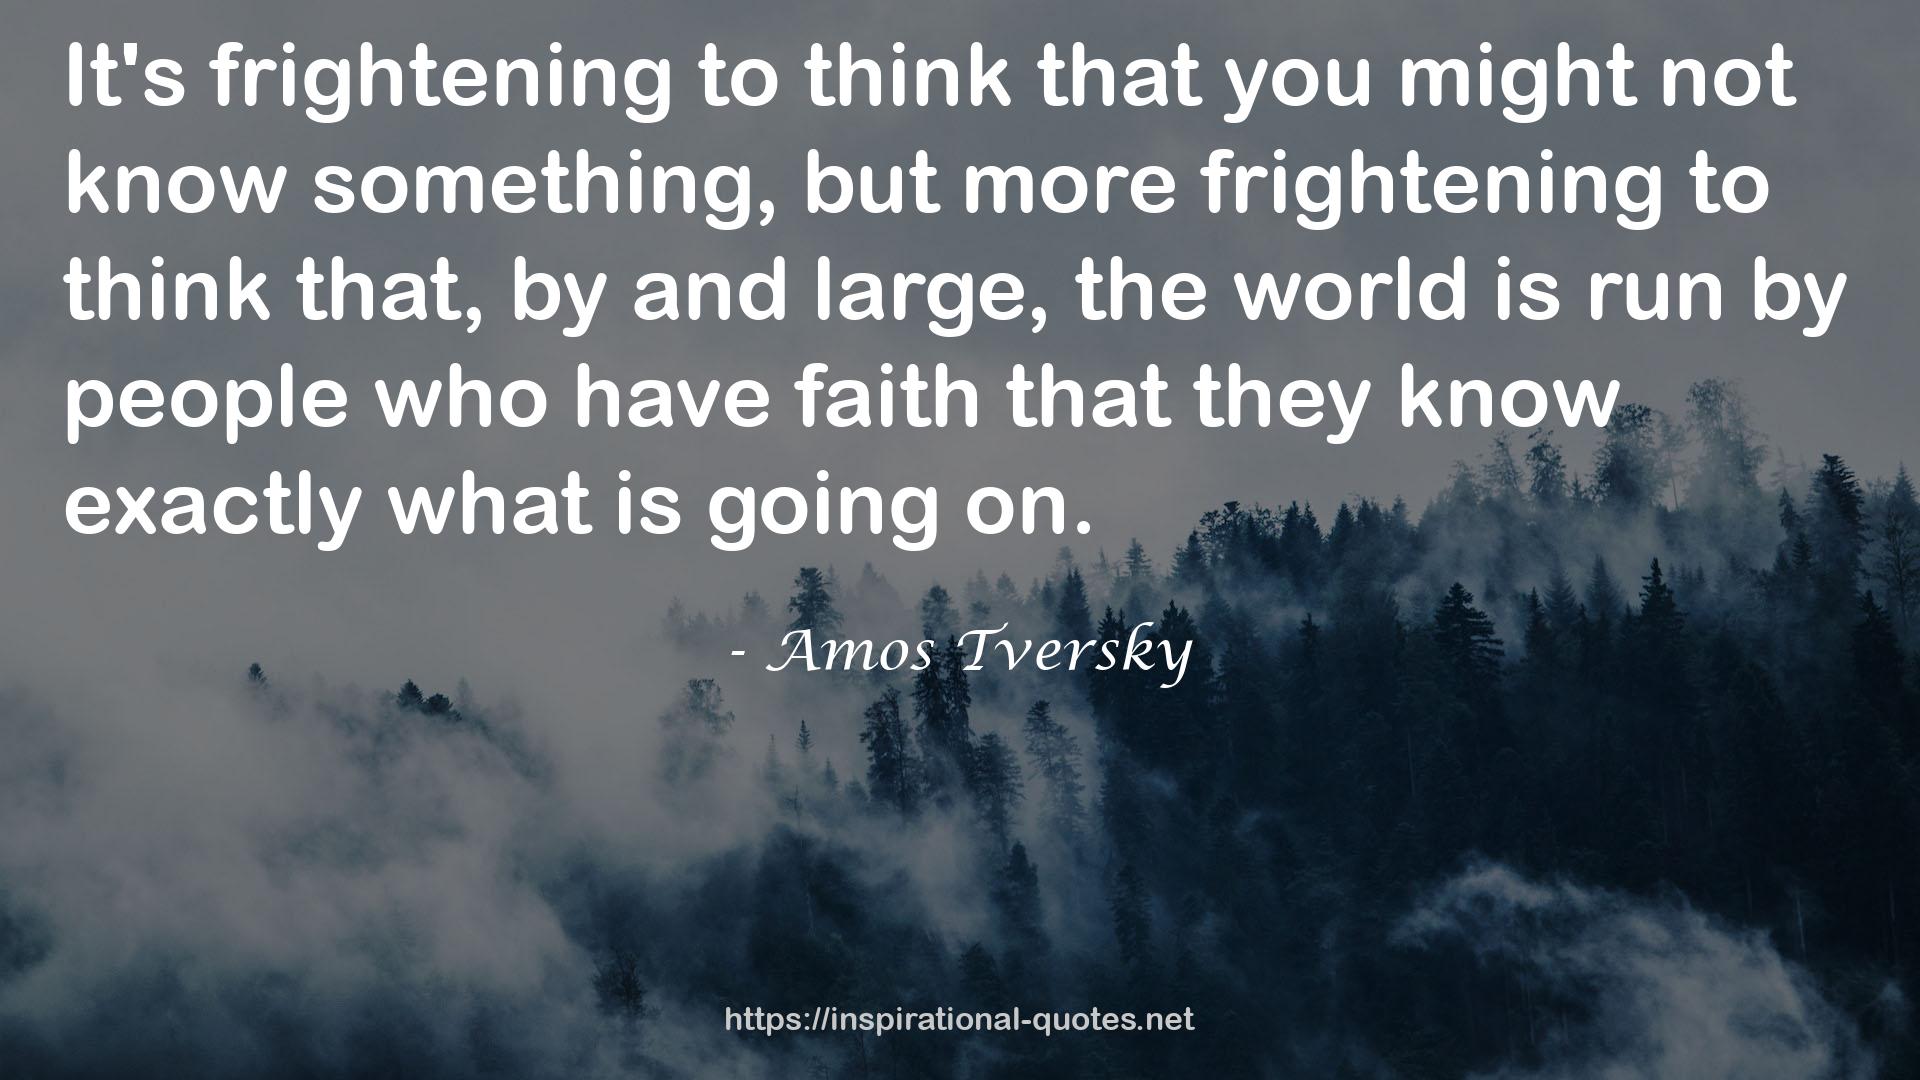 Amos Tversky QUOTES